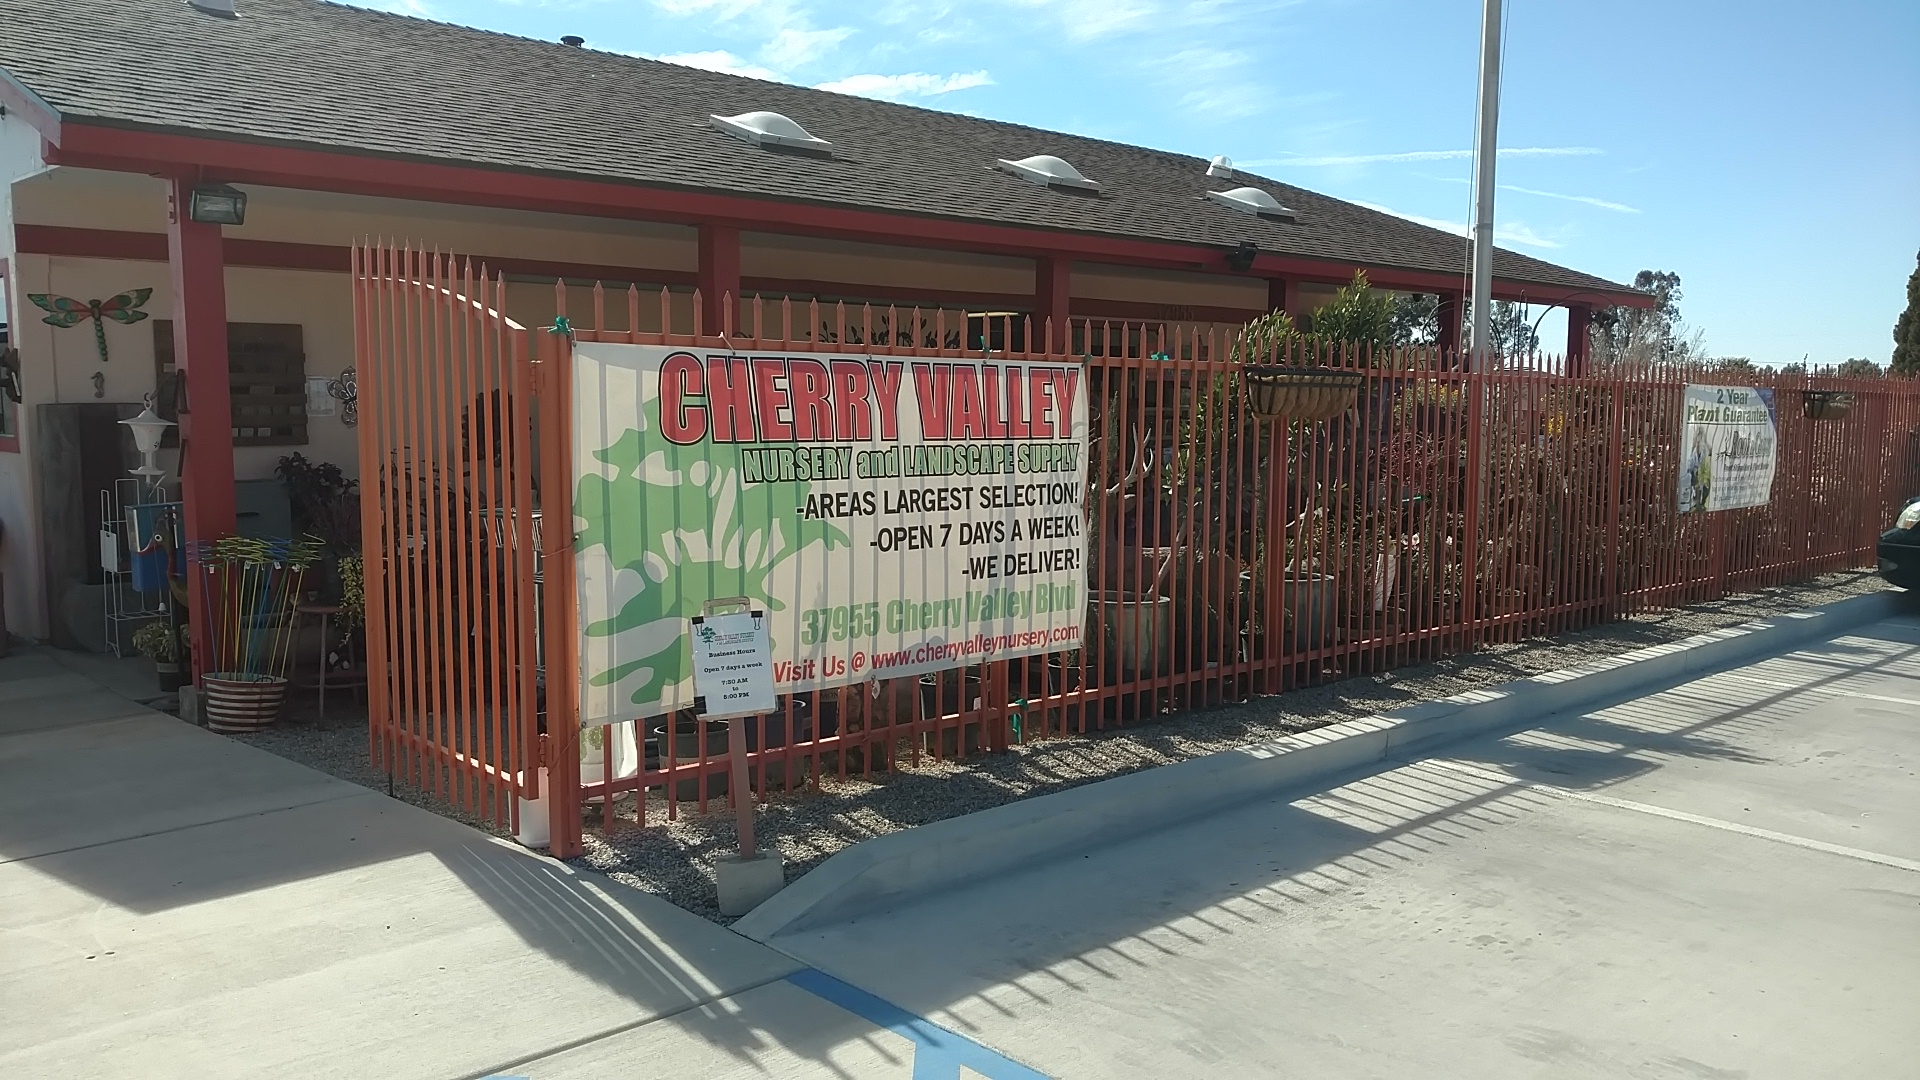 Cherry Valley Nursery And Landscape Supply